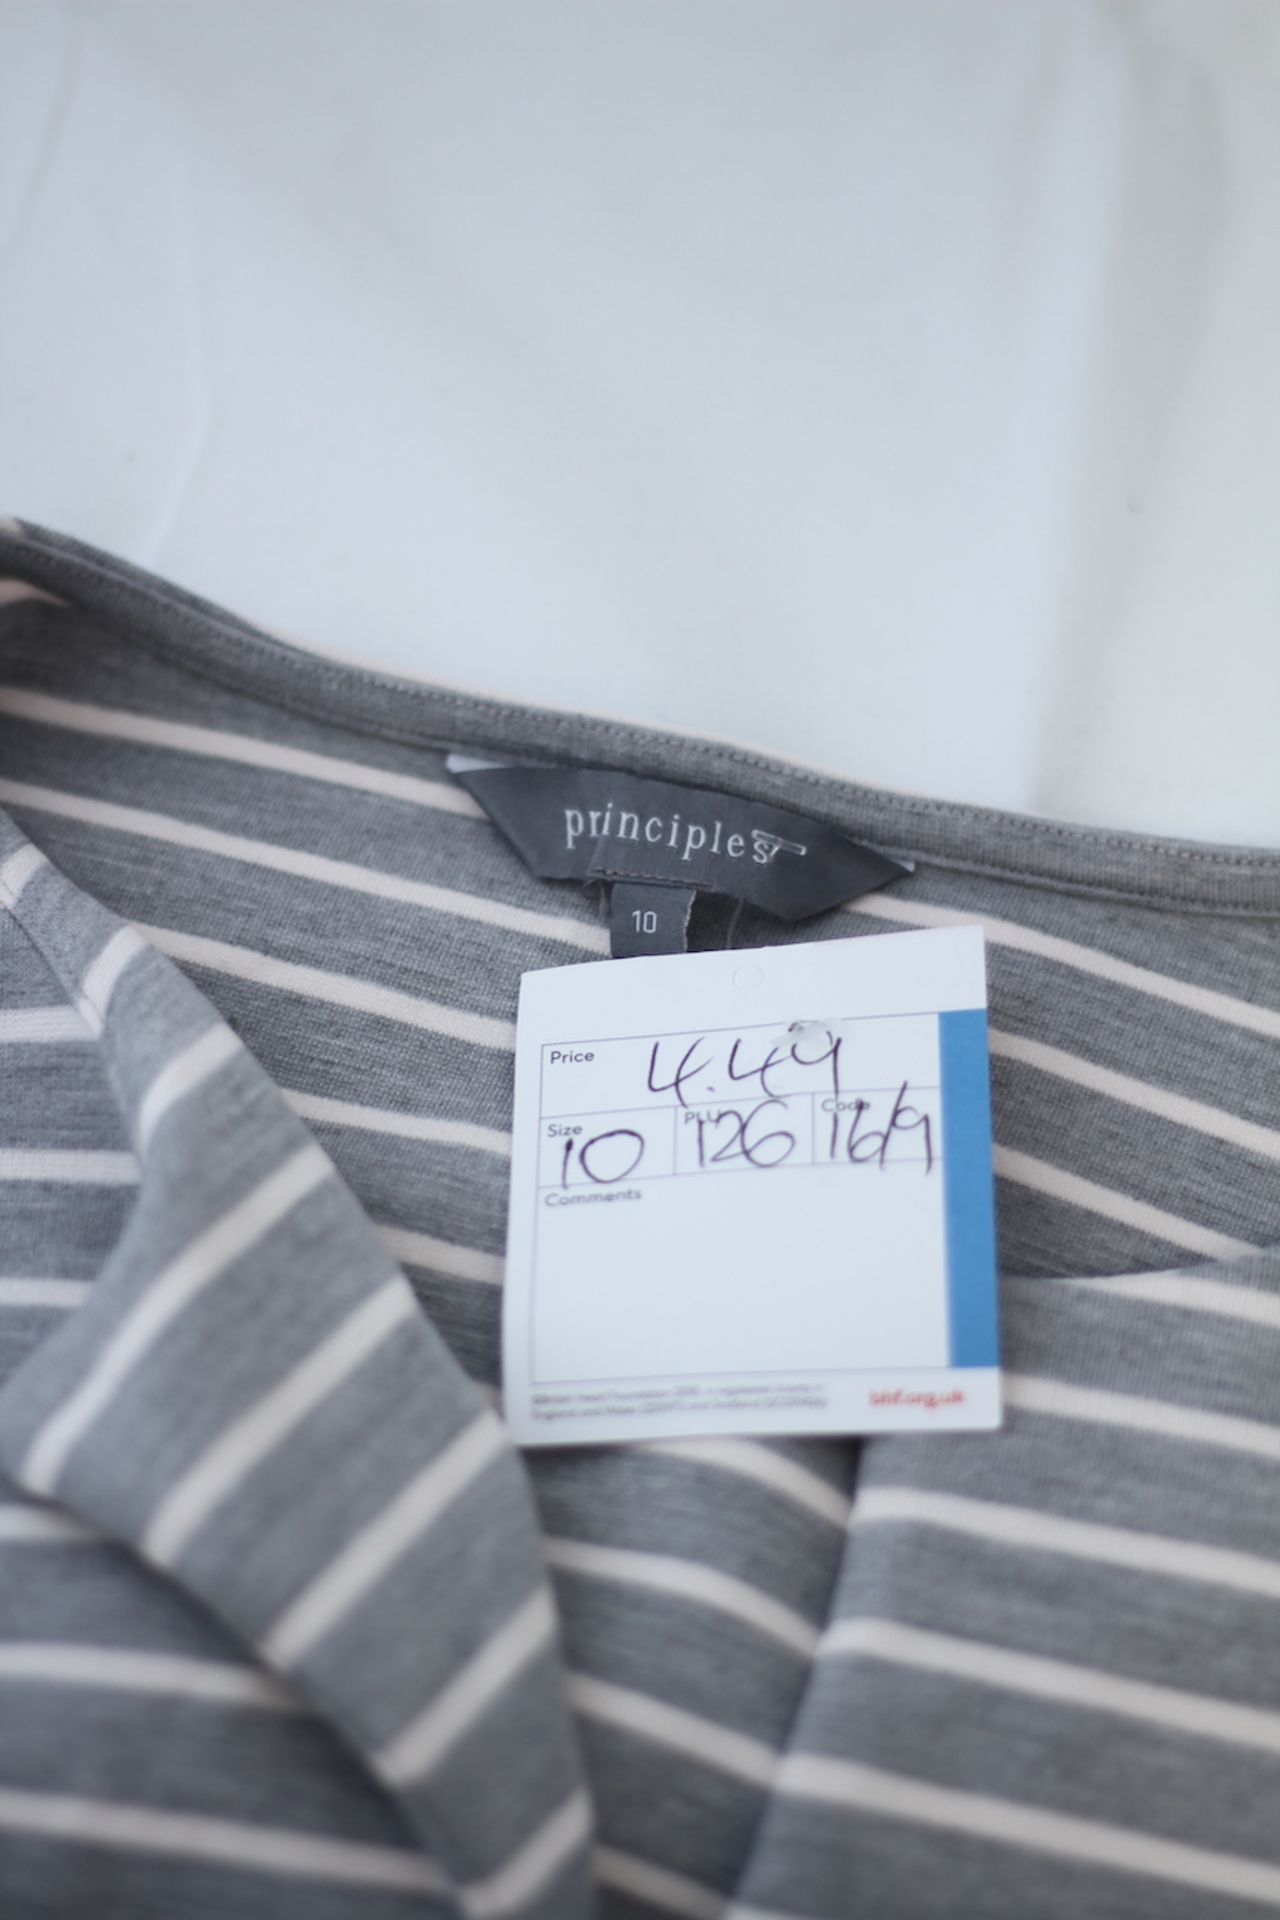 PRINCIPLES SWEATSHIRT NEW WITH LABELS, Colour : GREY / WHITE, AGE: UNKNOWN, SIZE: 10, CONDITION - Image 2 of 2